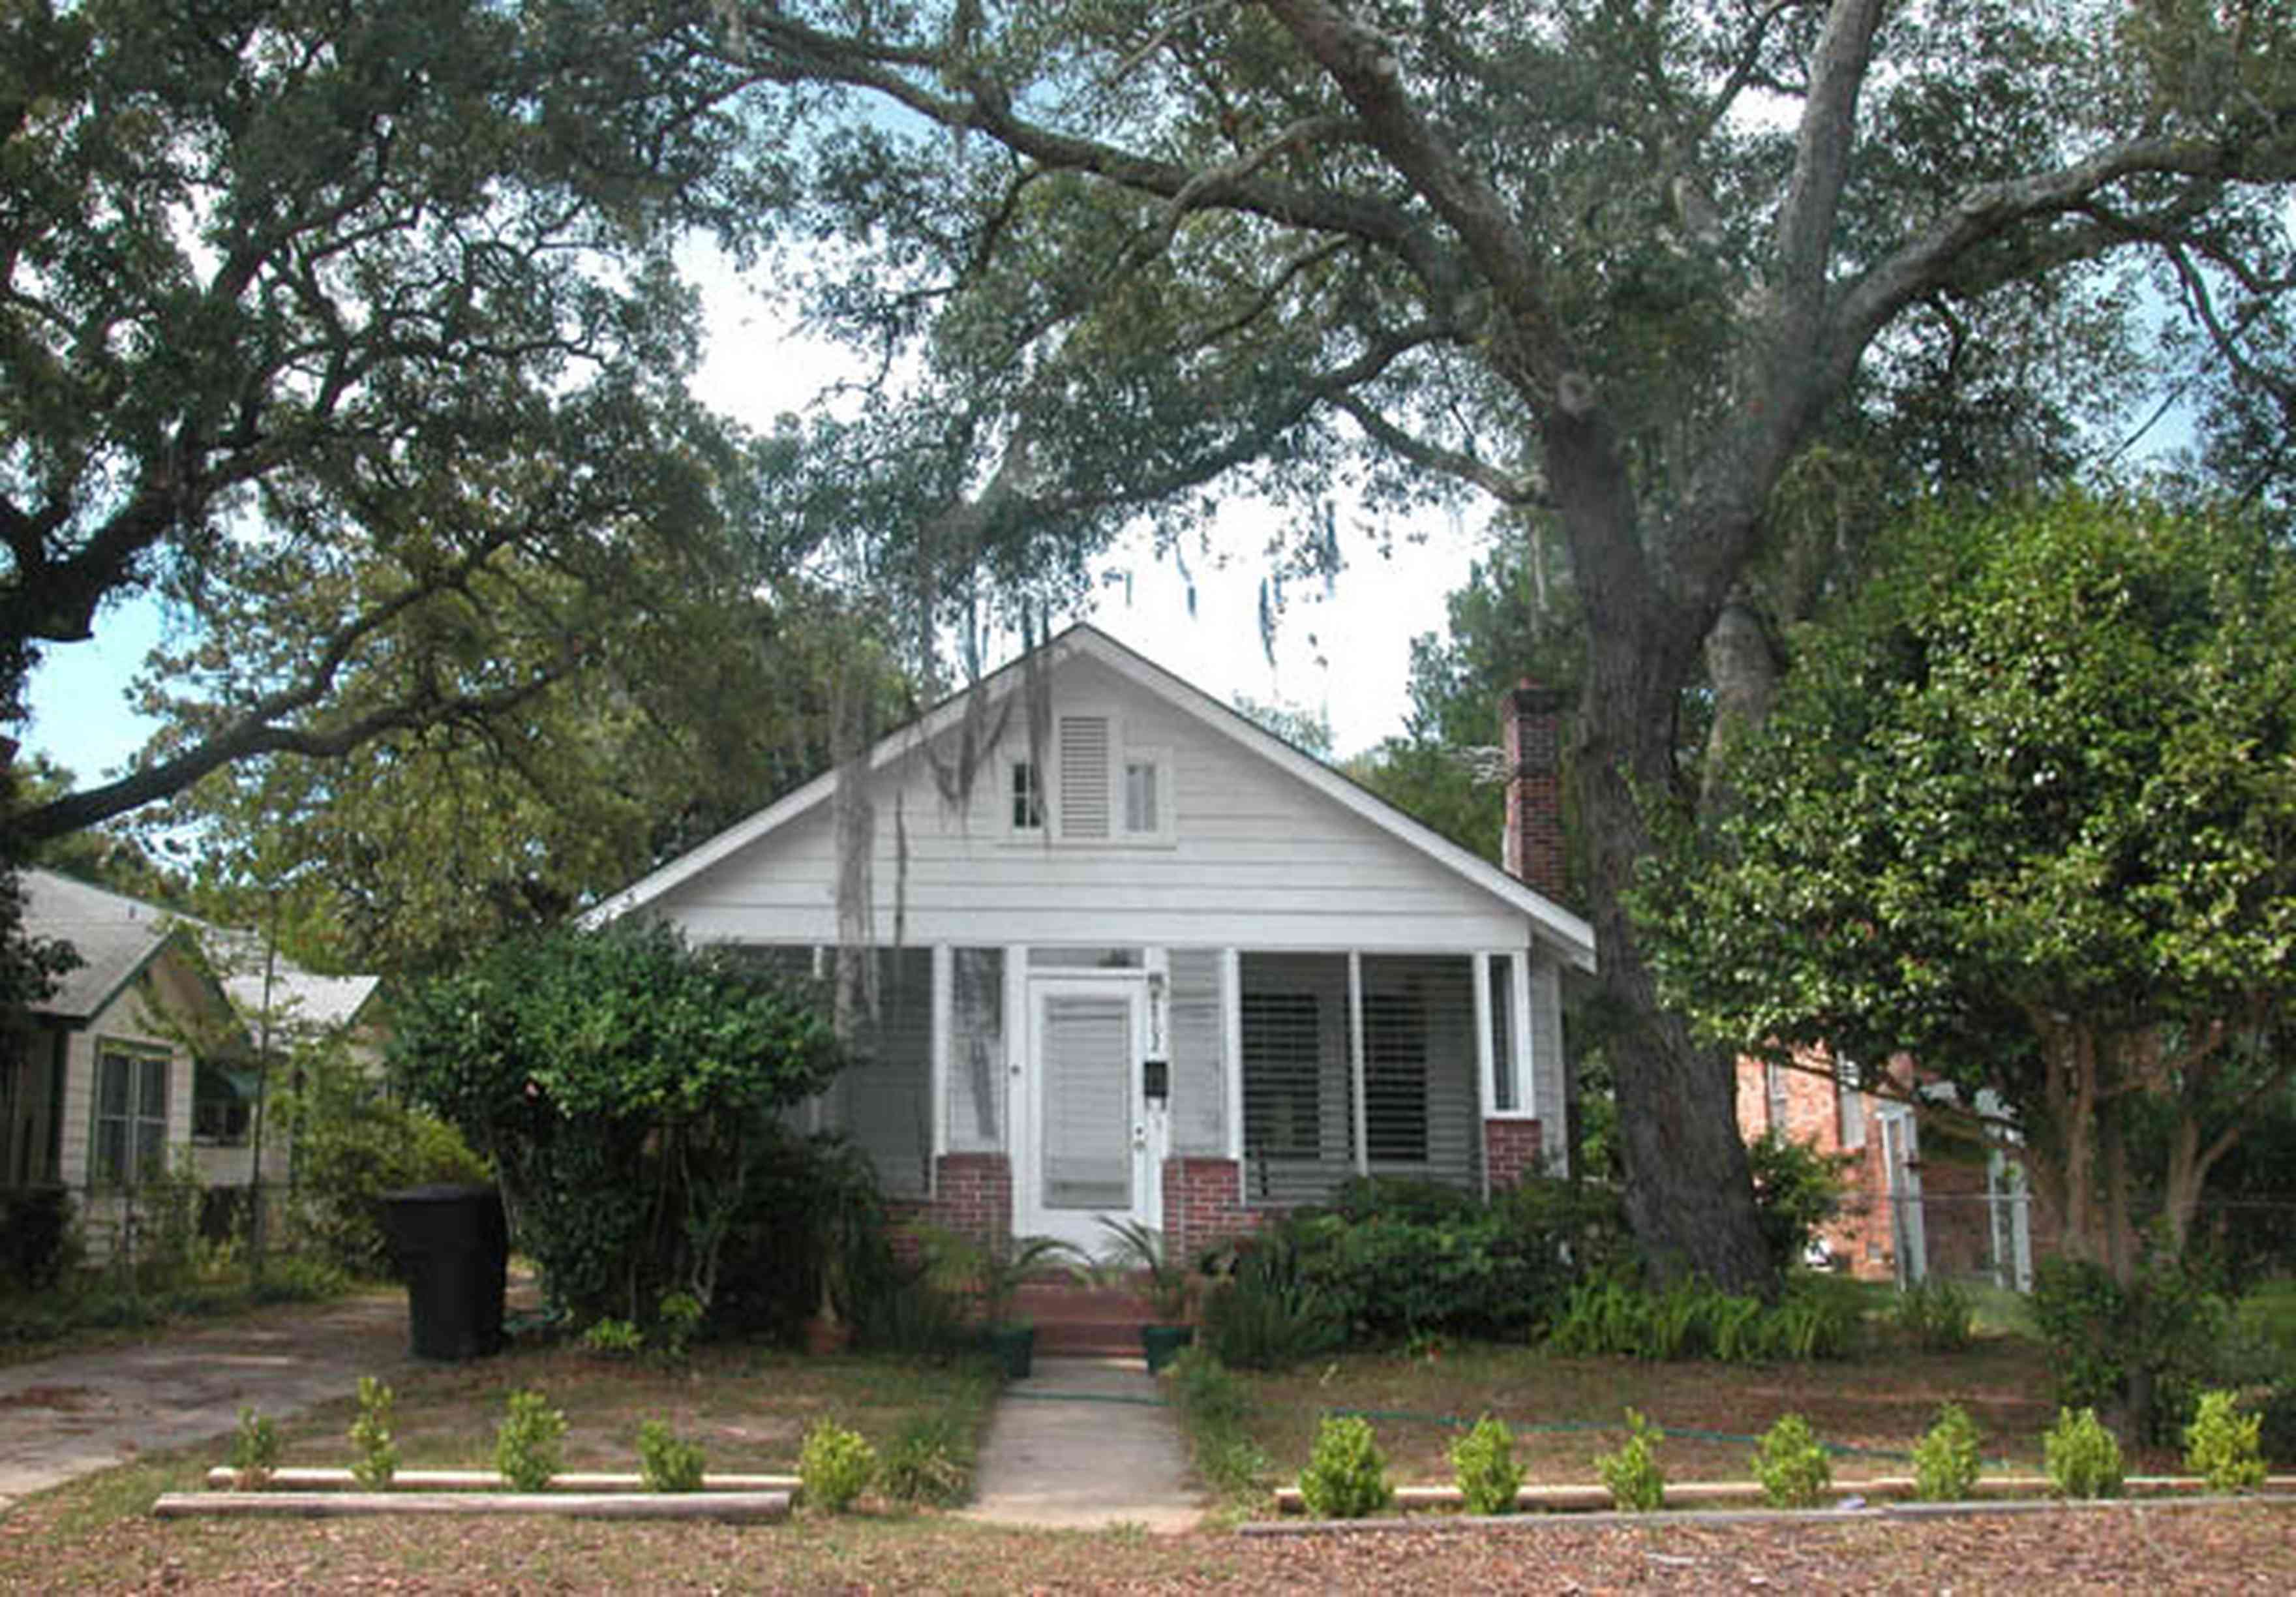 East-Pensacola-Heights:-2900-Jackson-Street_03.jpg:  craftsman cottage, oak tree, spanish moss, chain link fence, front porch